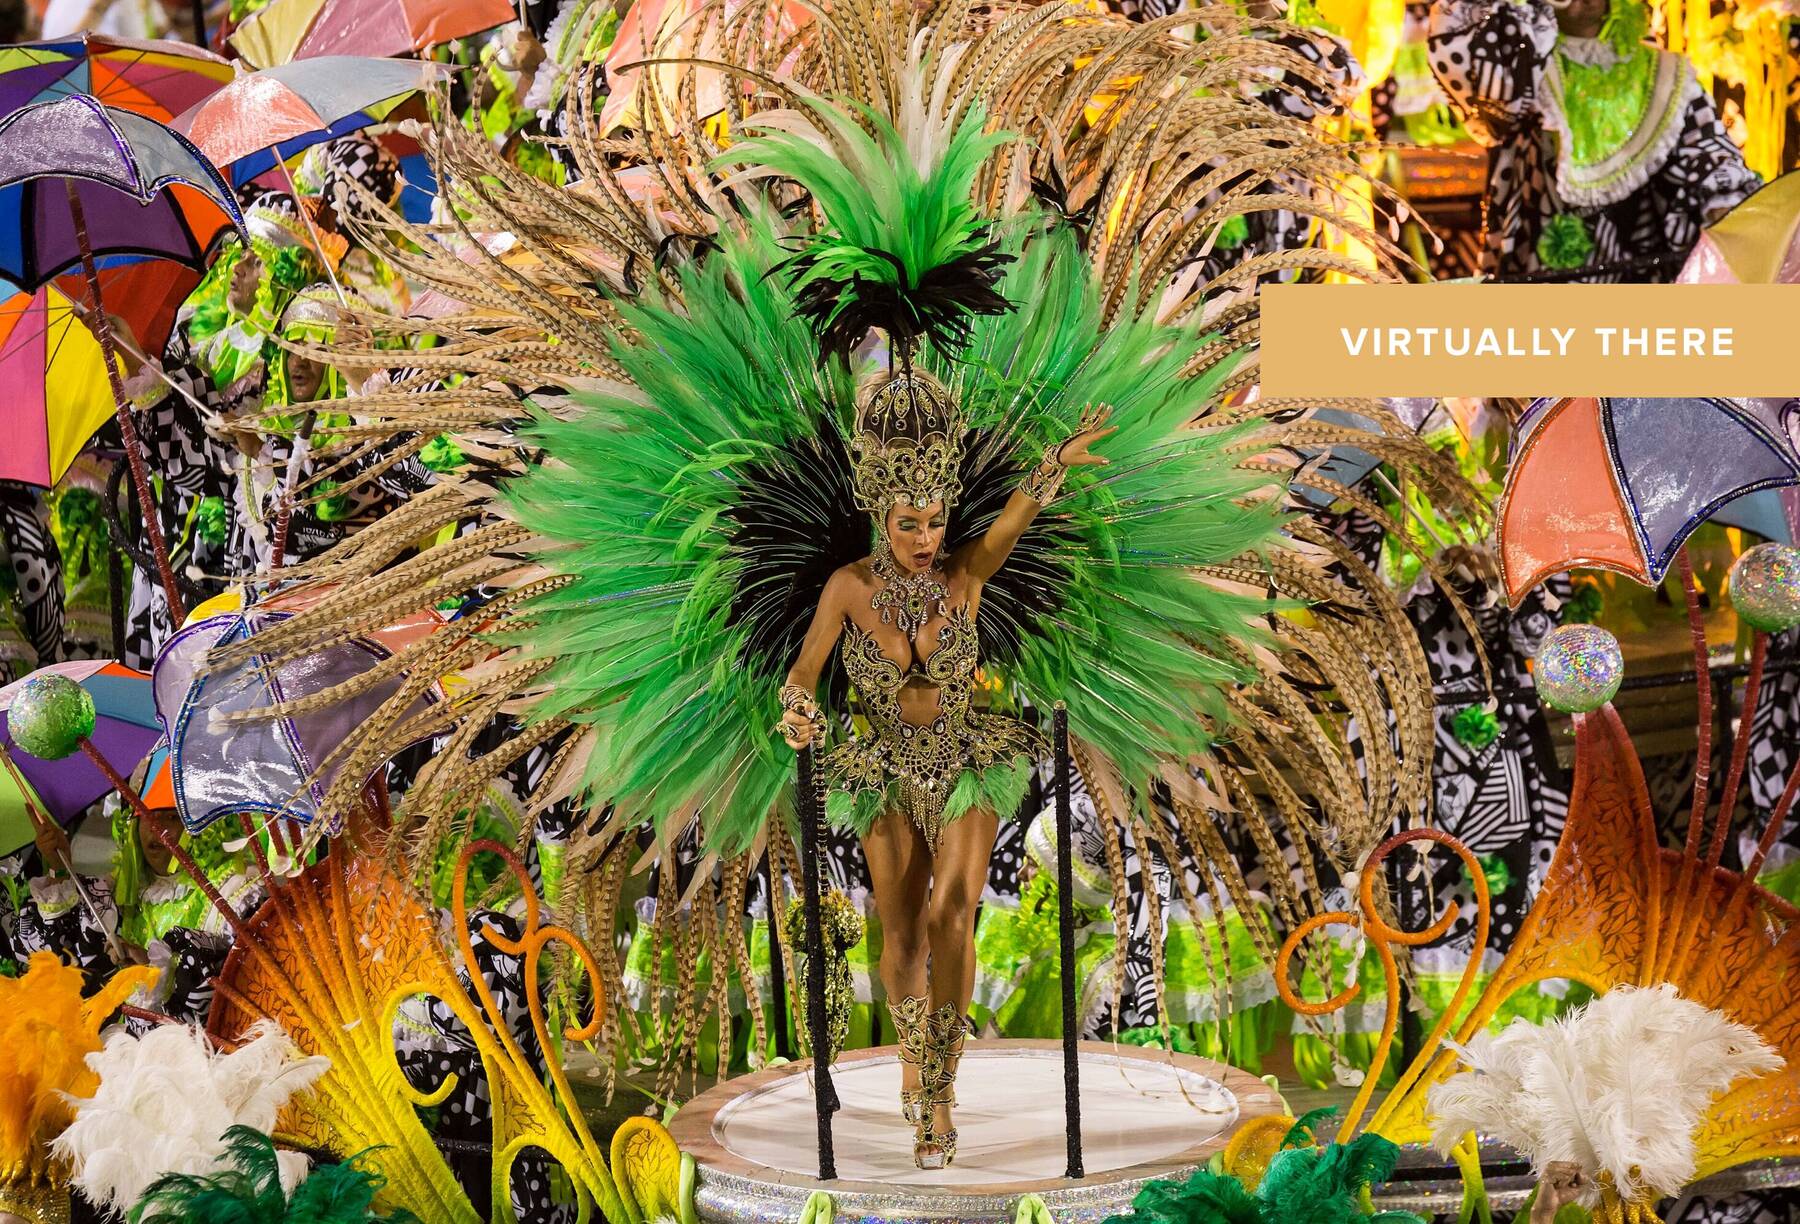 The World's Greatest Party: Rio Carnival